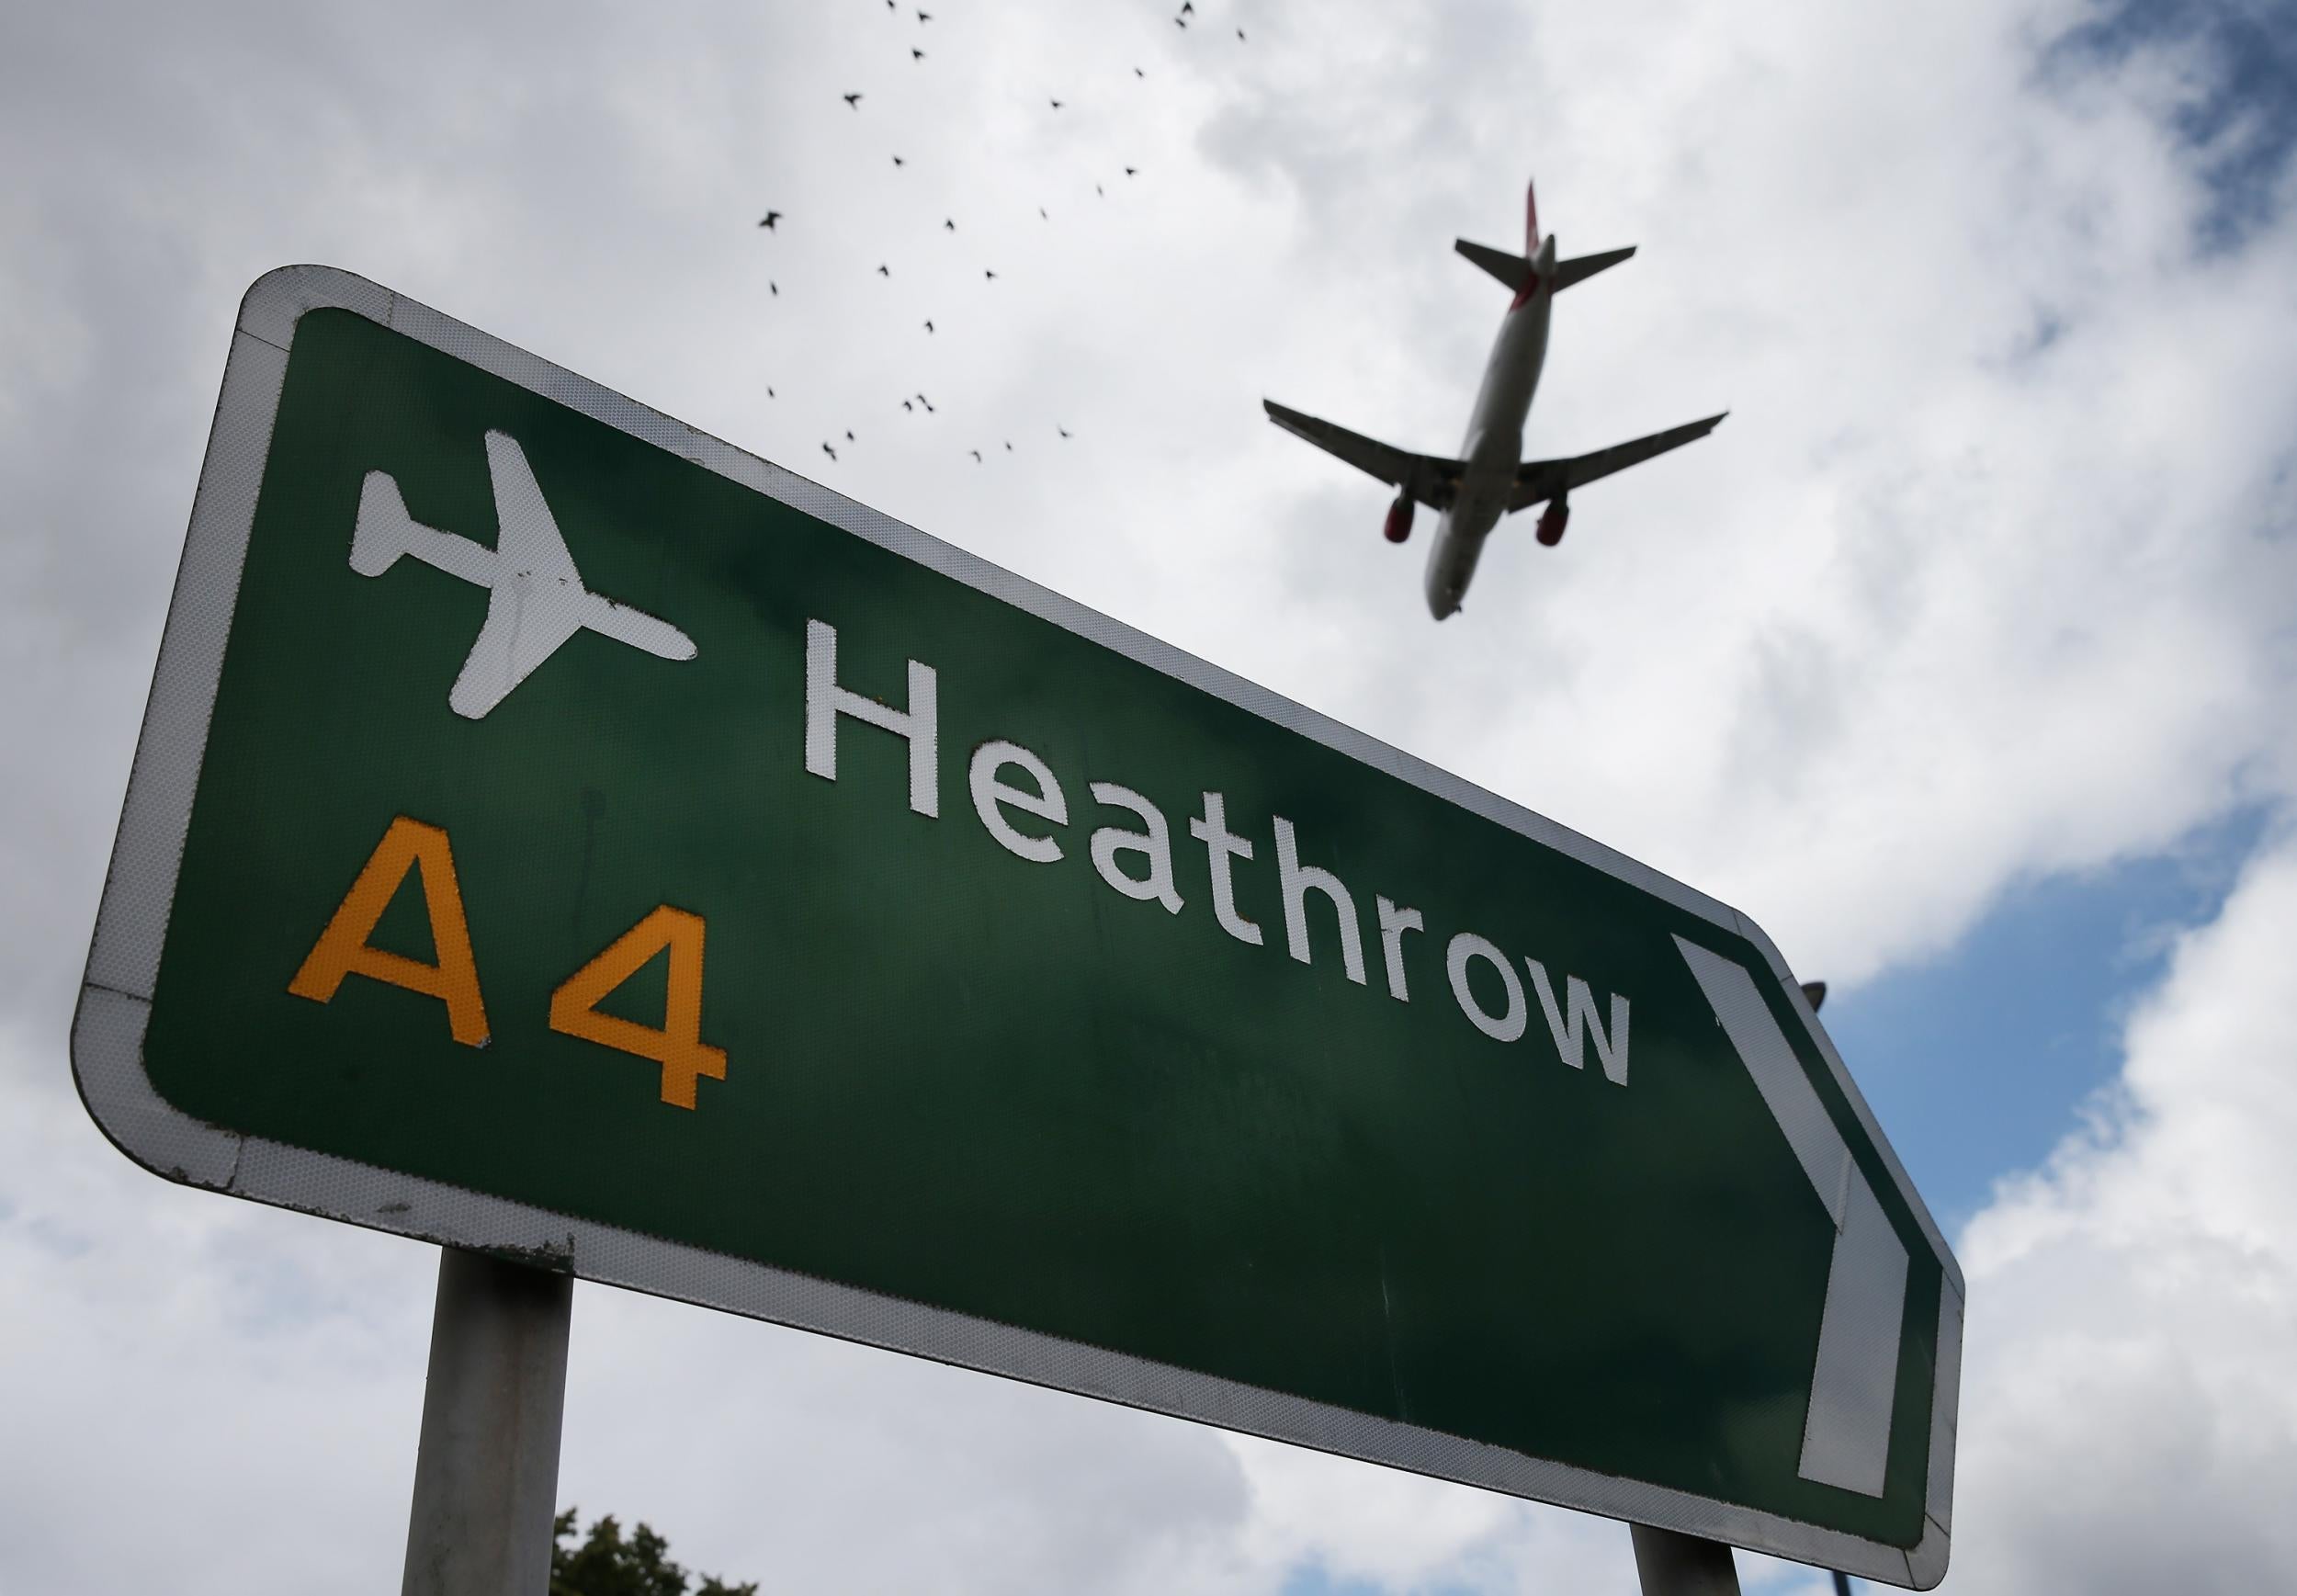 Labour has failed to set out a clear policy on Heathrow expansion, party MPs say